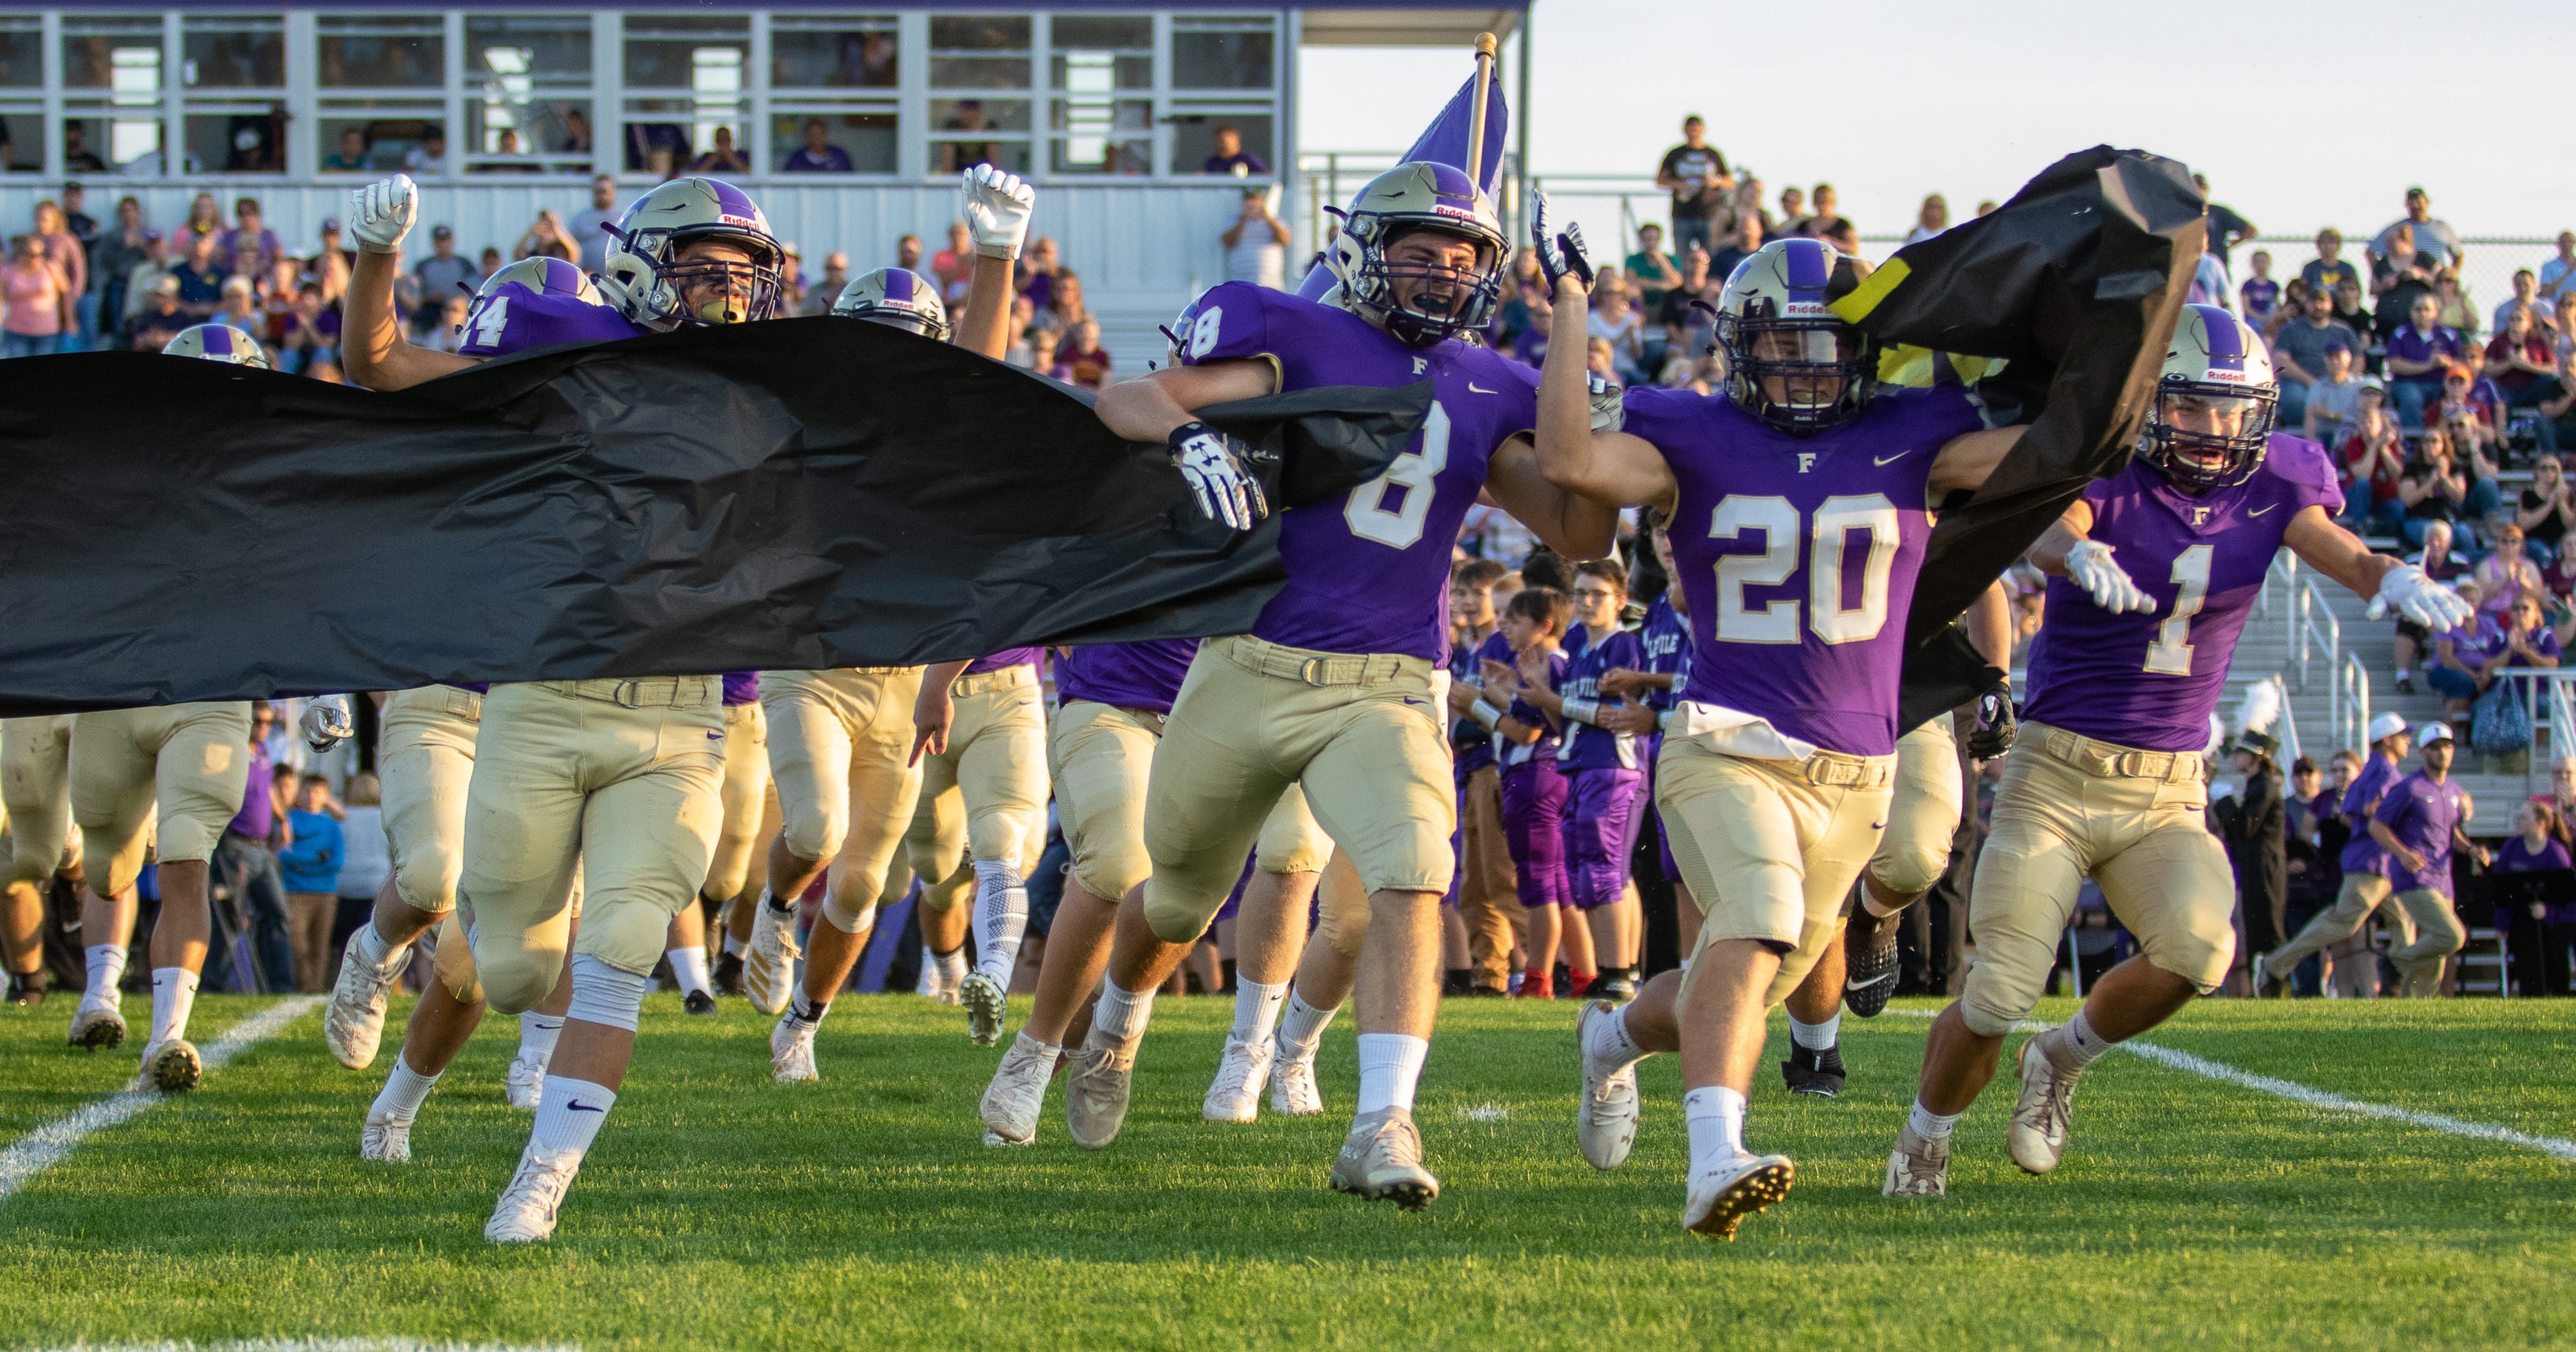 Fowlerville football starting to gain statewide recognition